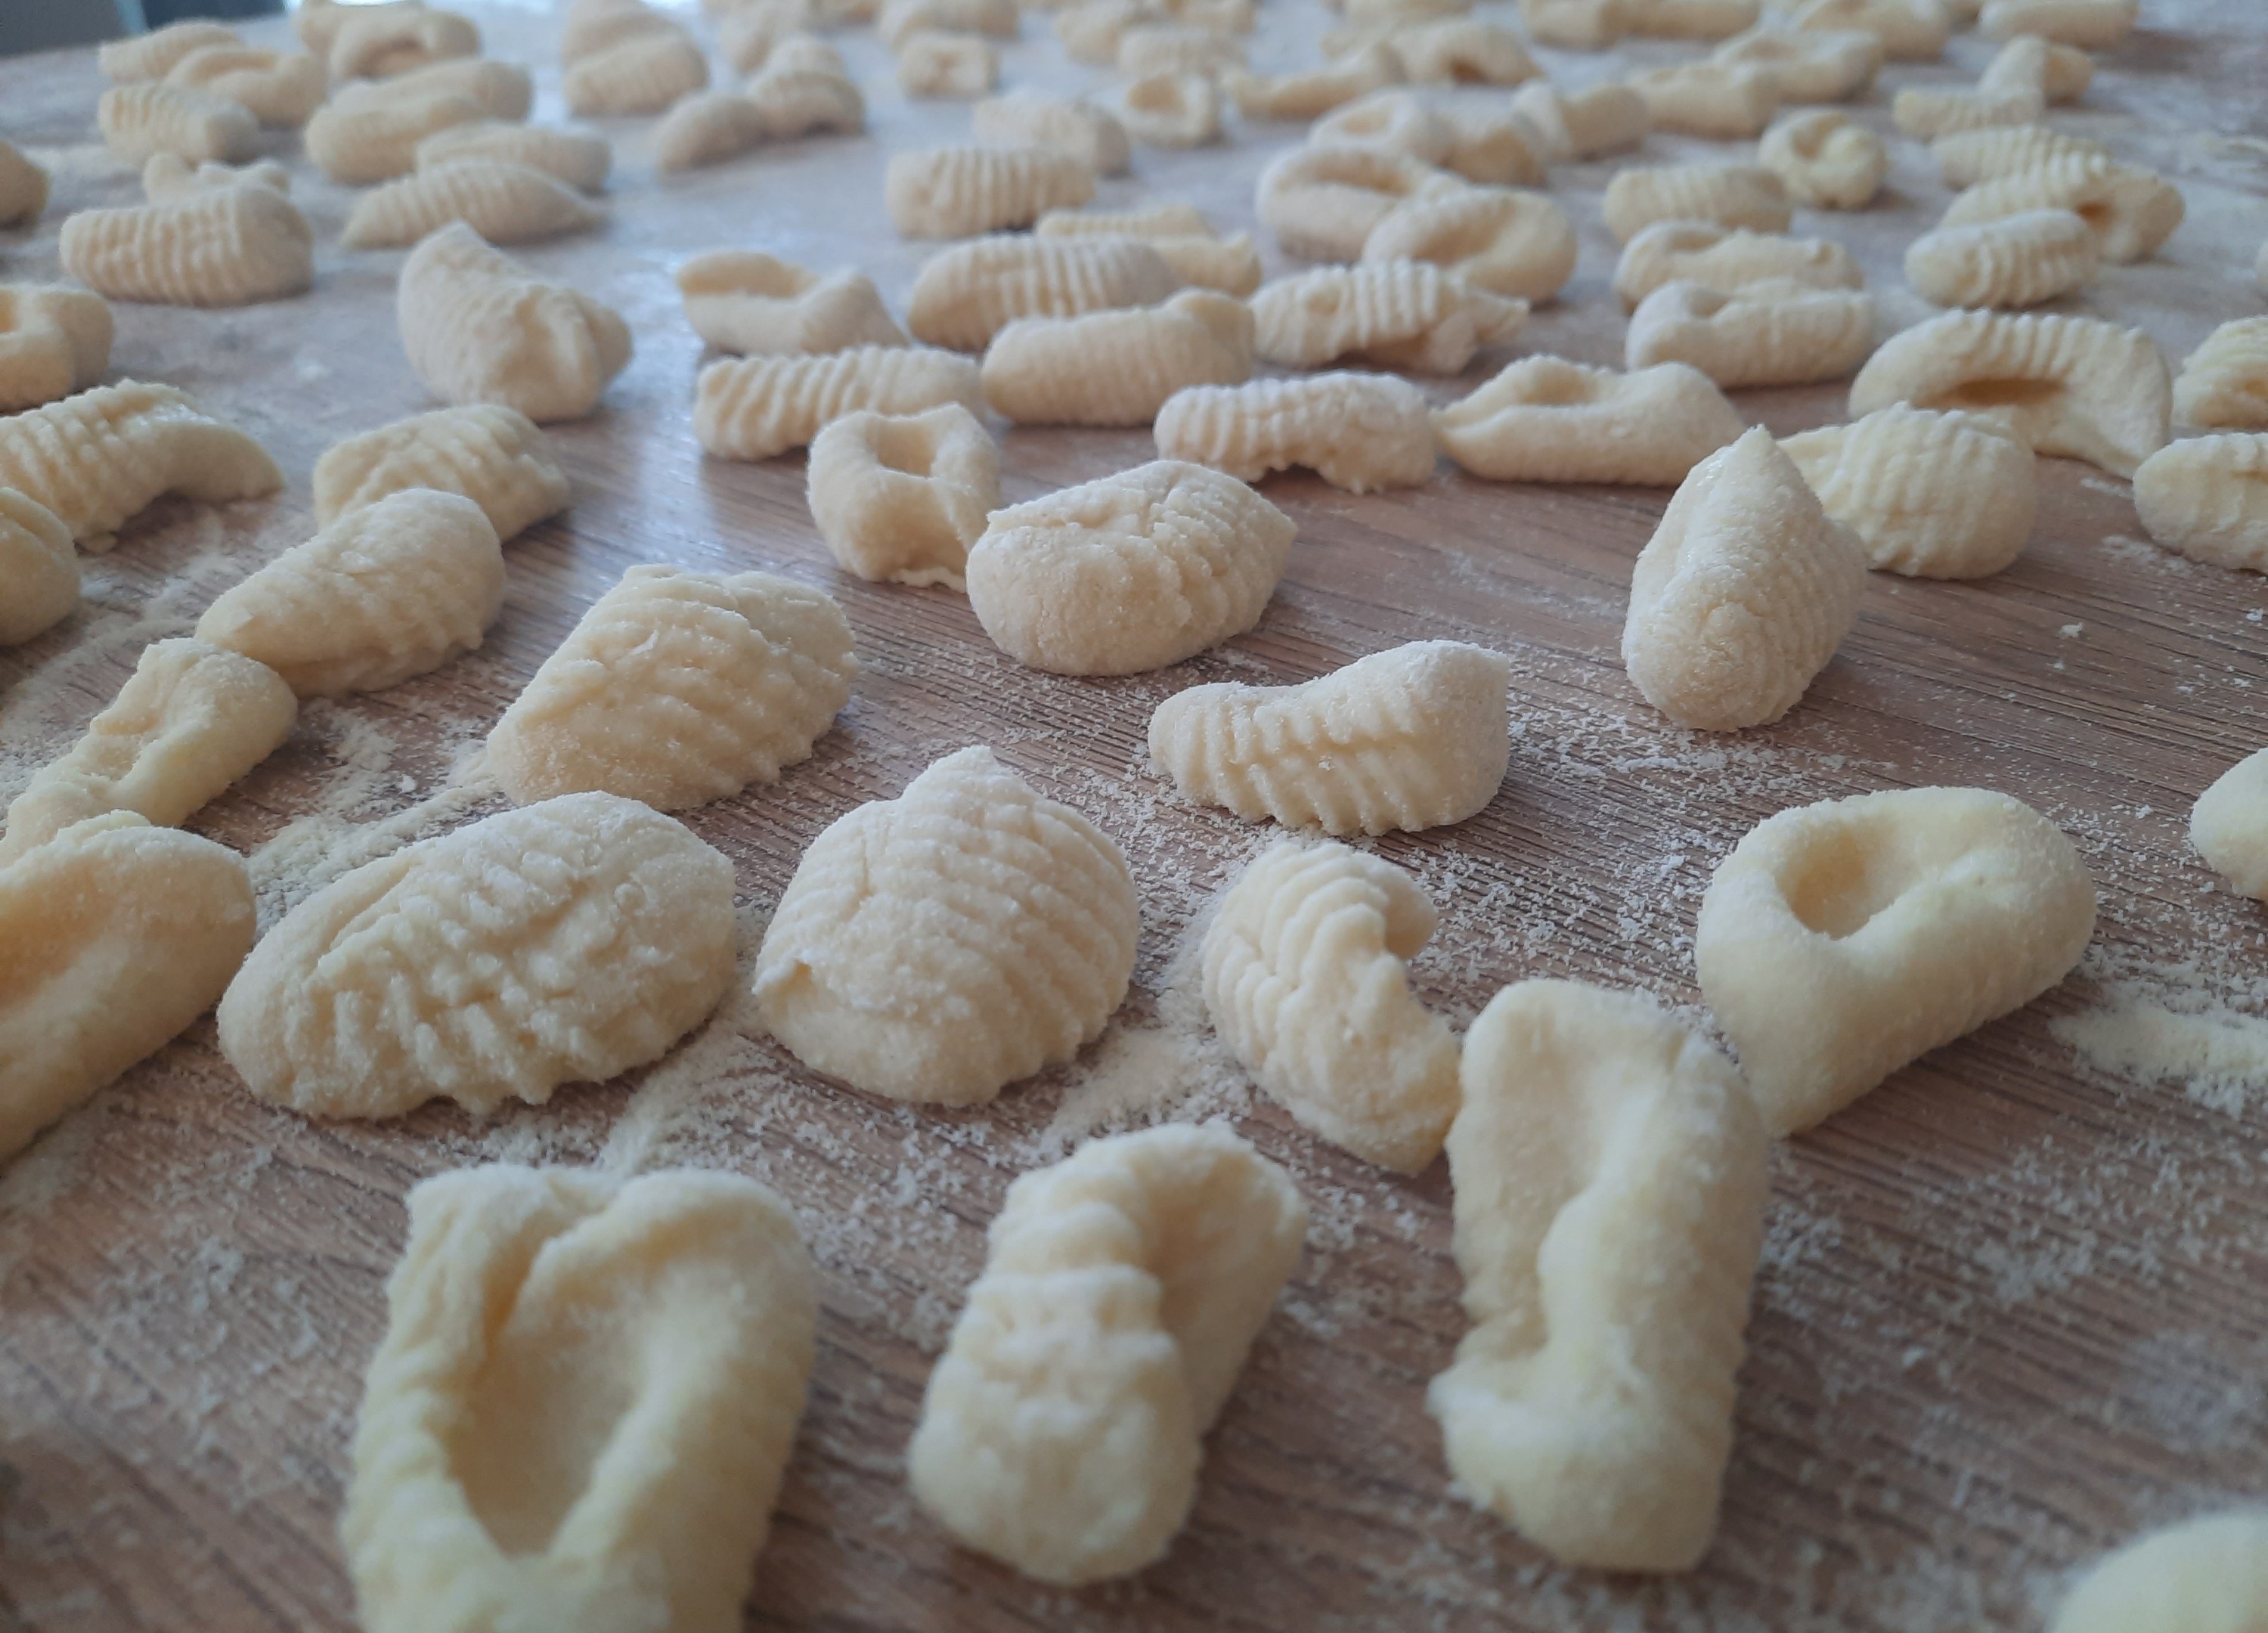 homemade gnocchi, uncooked, on a wooden cutting board